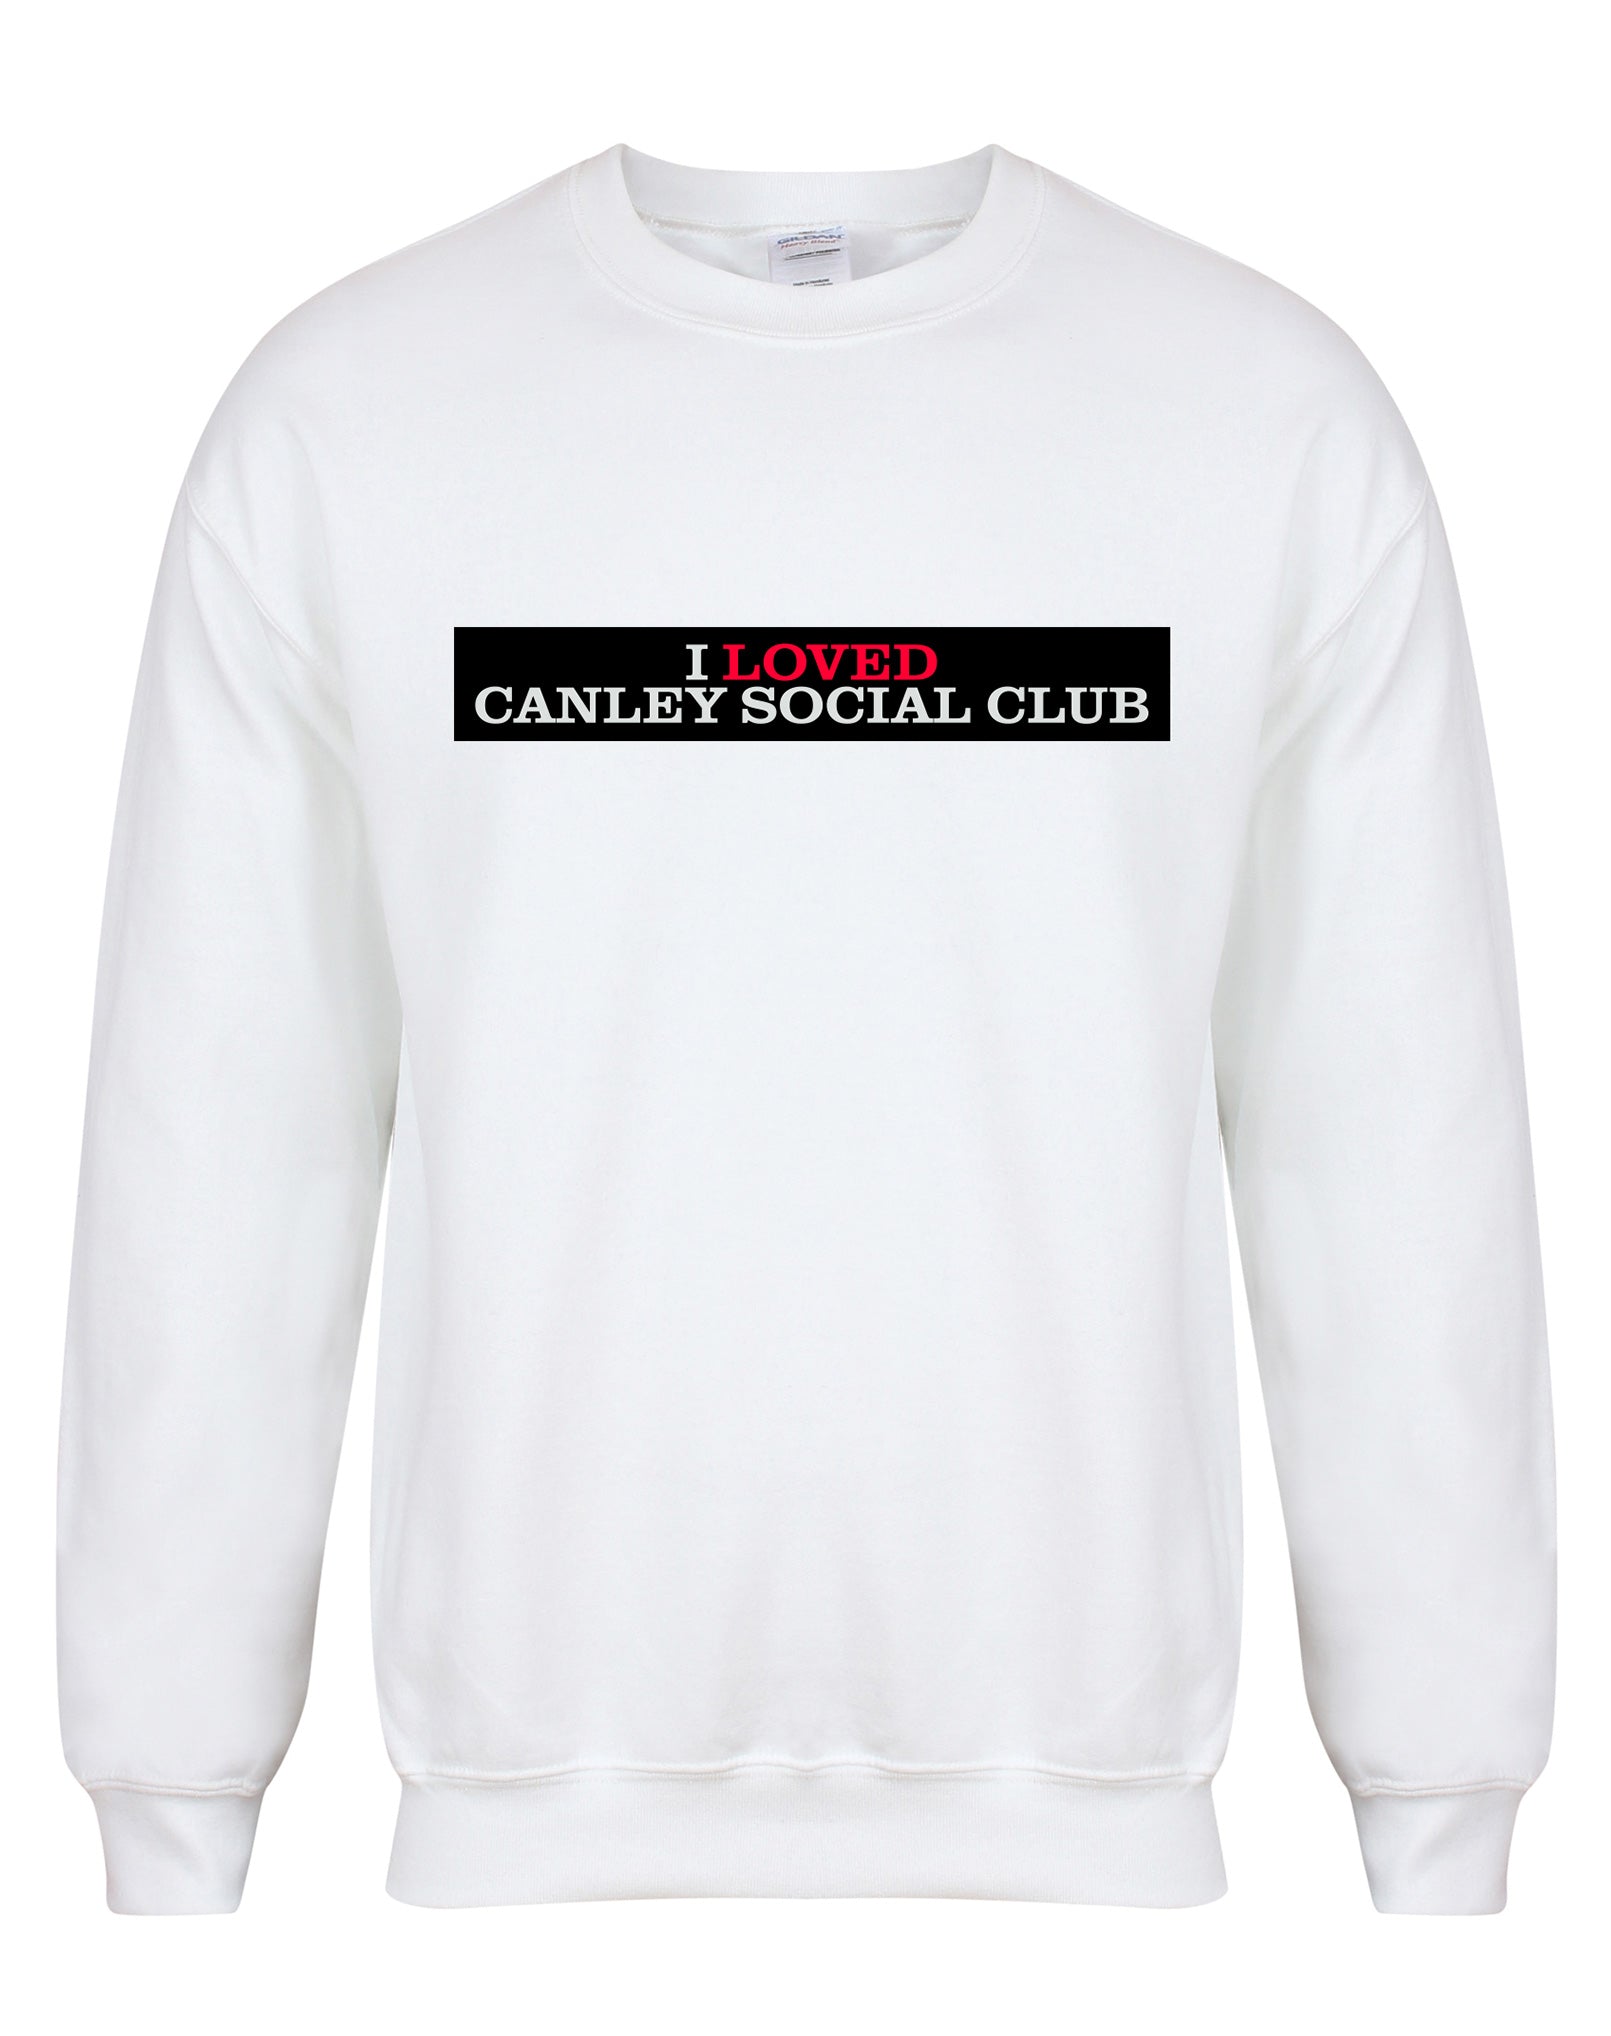 I Loved Canley Social Club unisex sweatshirt - various colours - Dirty Stop Outs